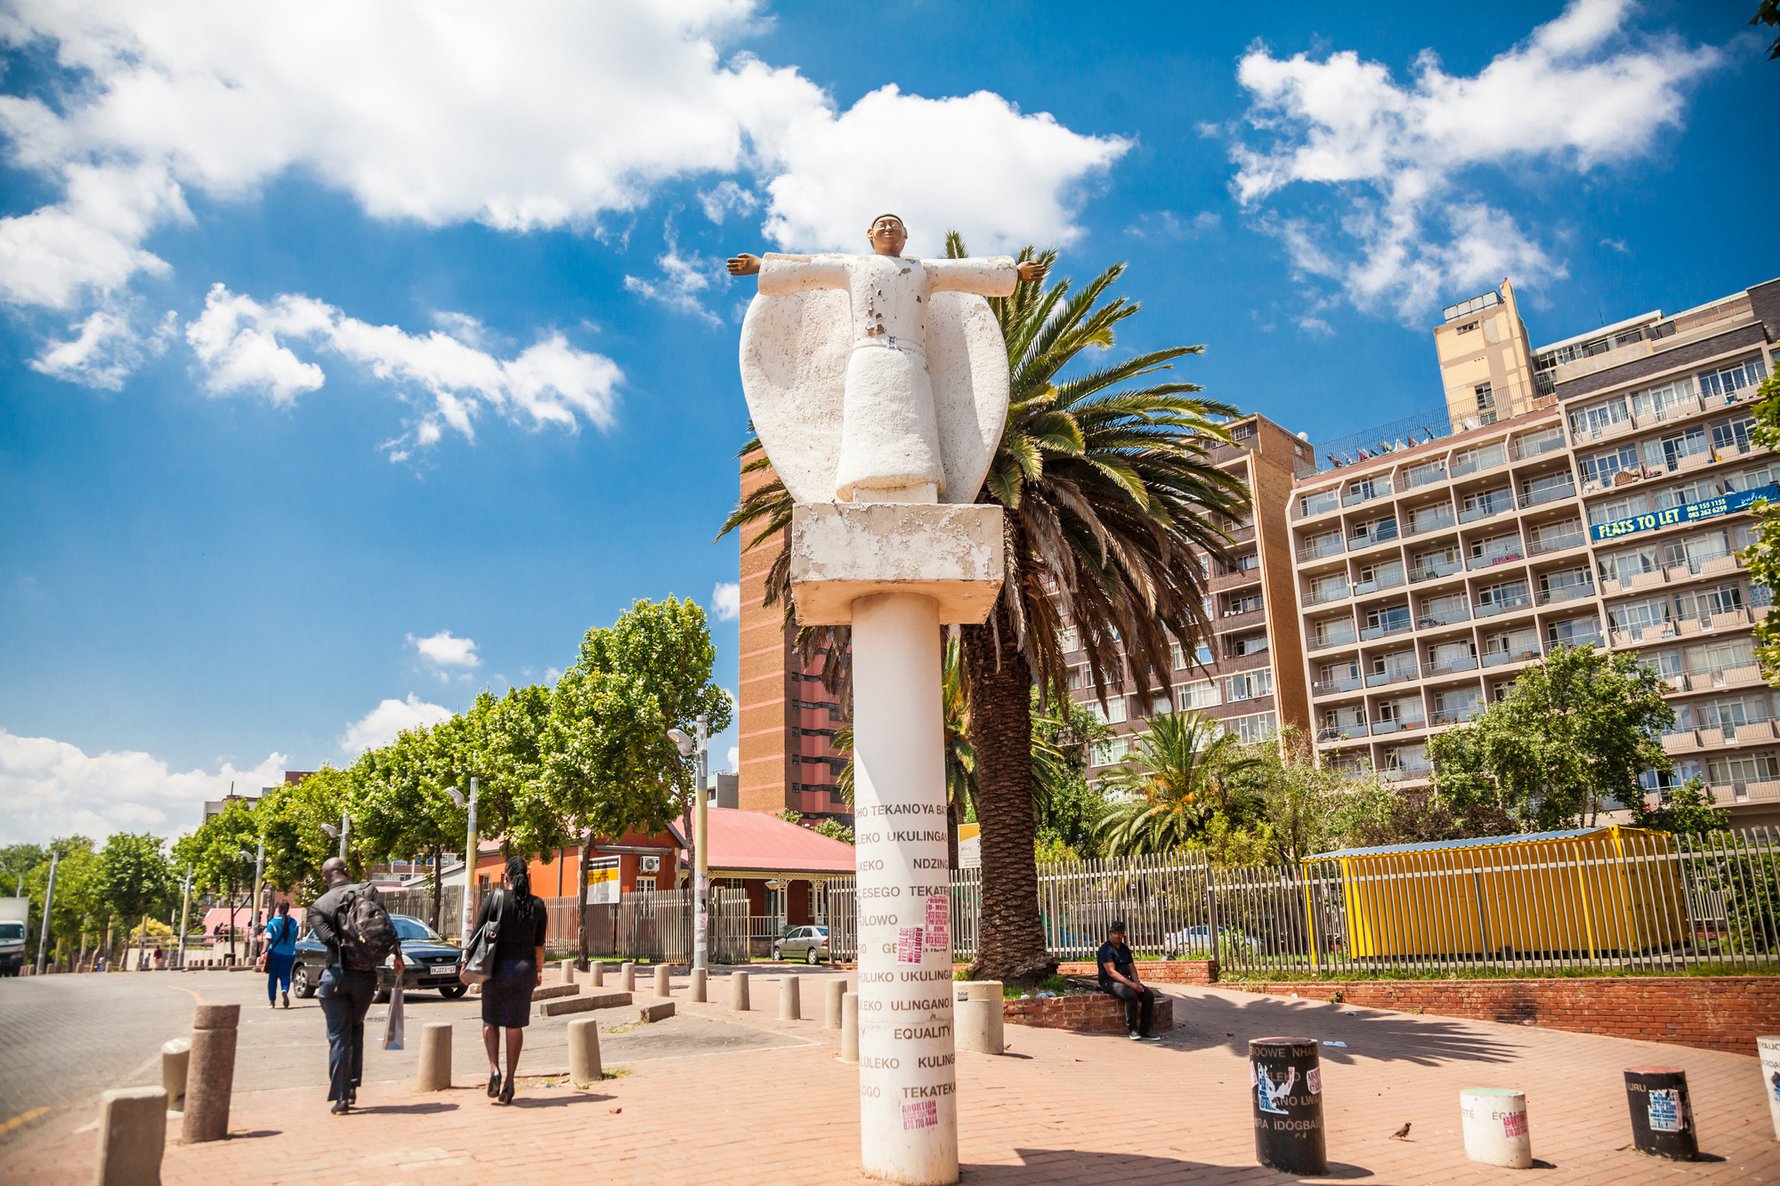 The five-metre-tall Angel of the North welcomes all to Hillbrow from her plinth near Constitution Hill.